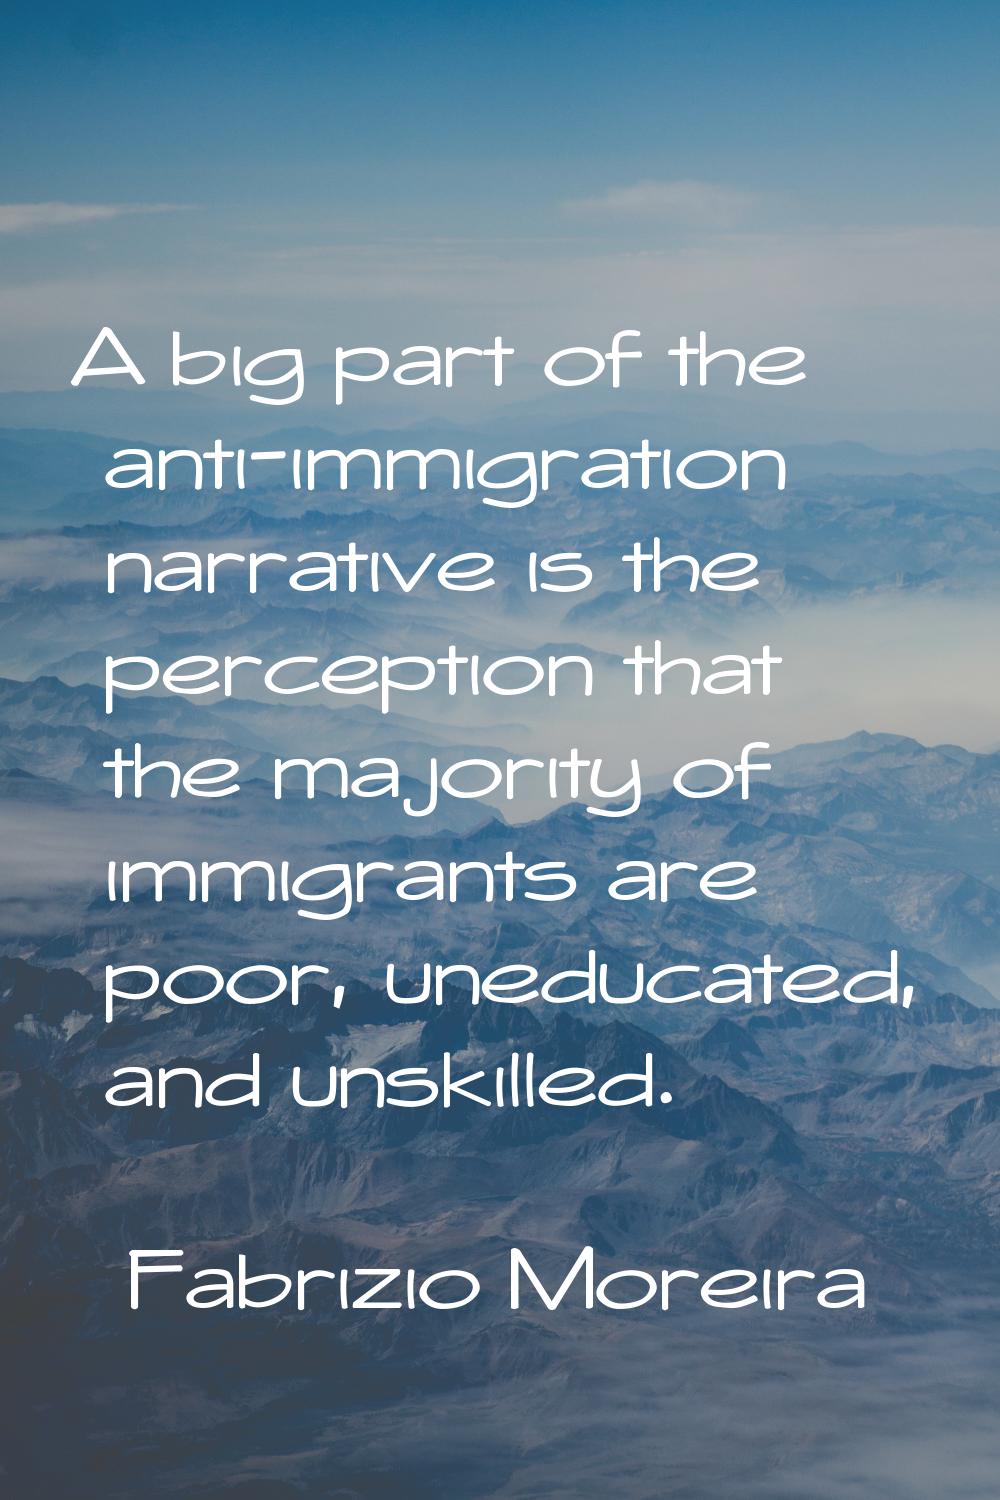 A big part of the anti-immigration narrative is the perception that the majority of immigrants are 